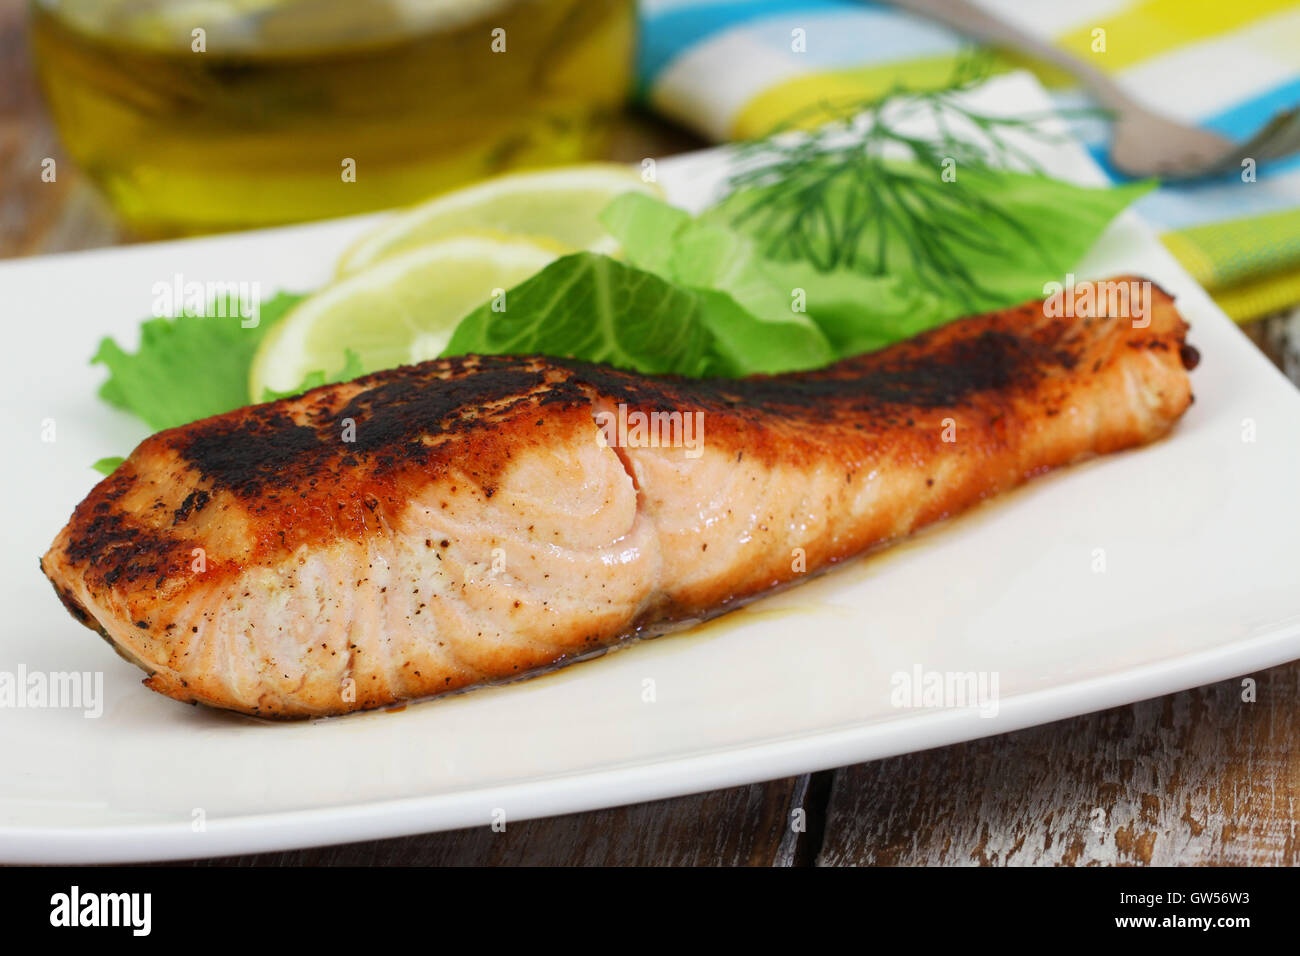 Grilled salmon steak with green salad and lemon on white plate Stock Photo